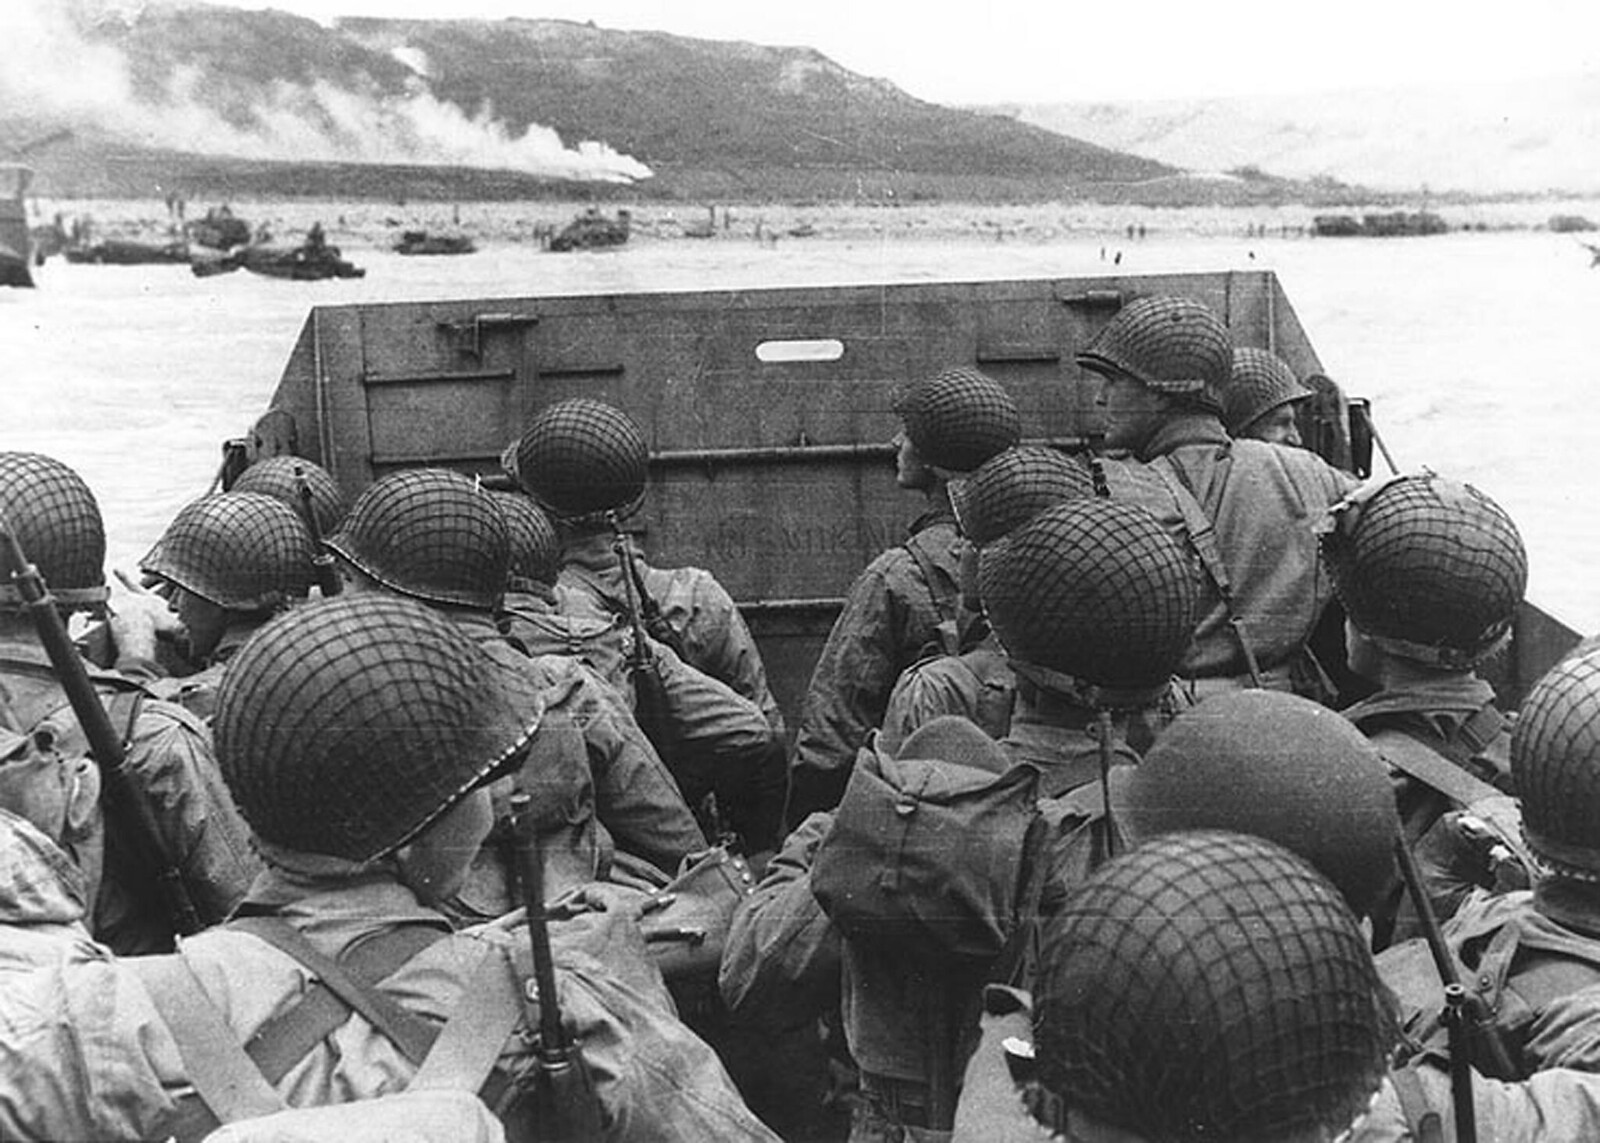 Troops in an LCVP landing craft approach Omaha Beach on D-Day, June 6, 1944